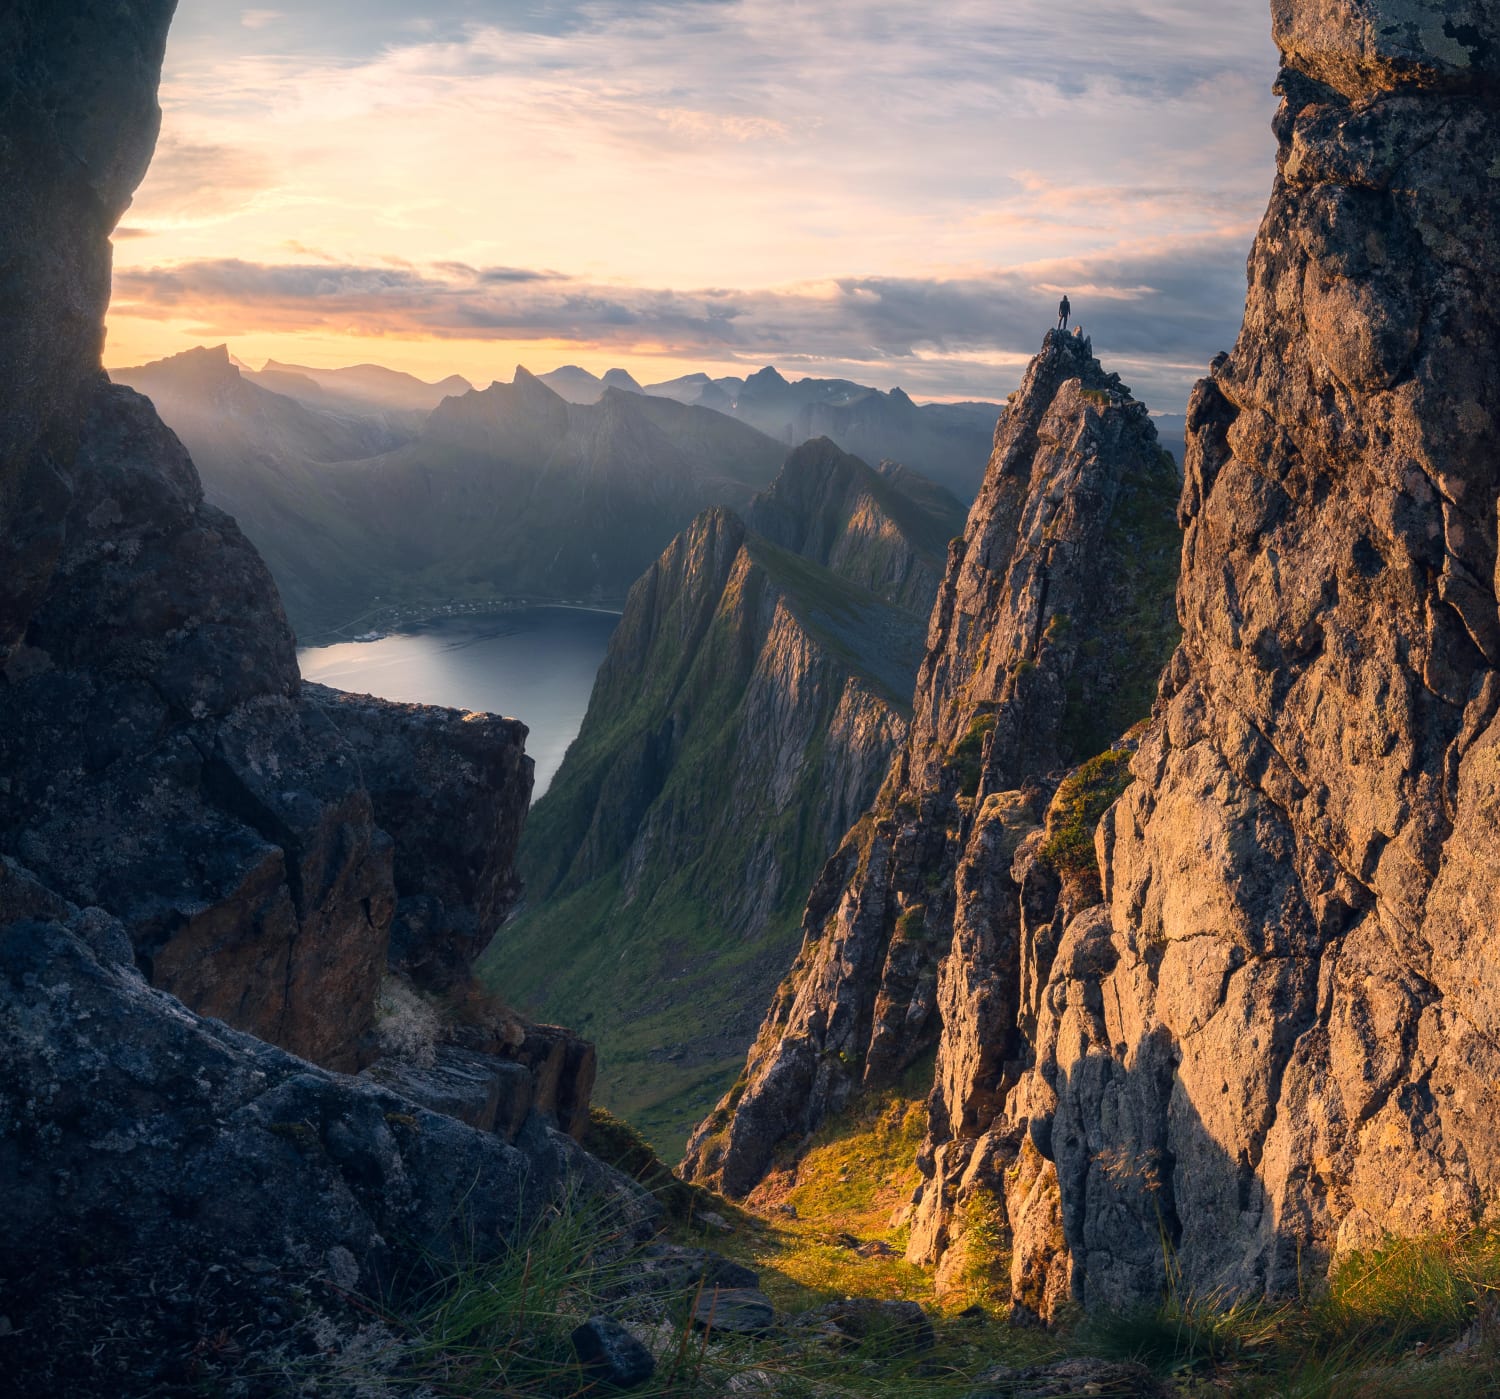 First light in the island of Senja, Norway.